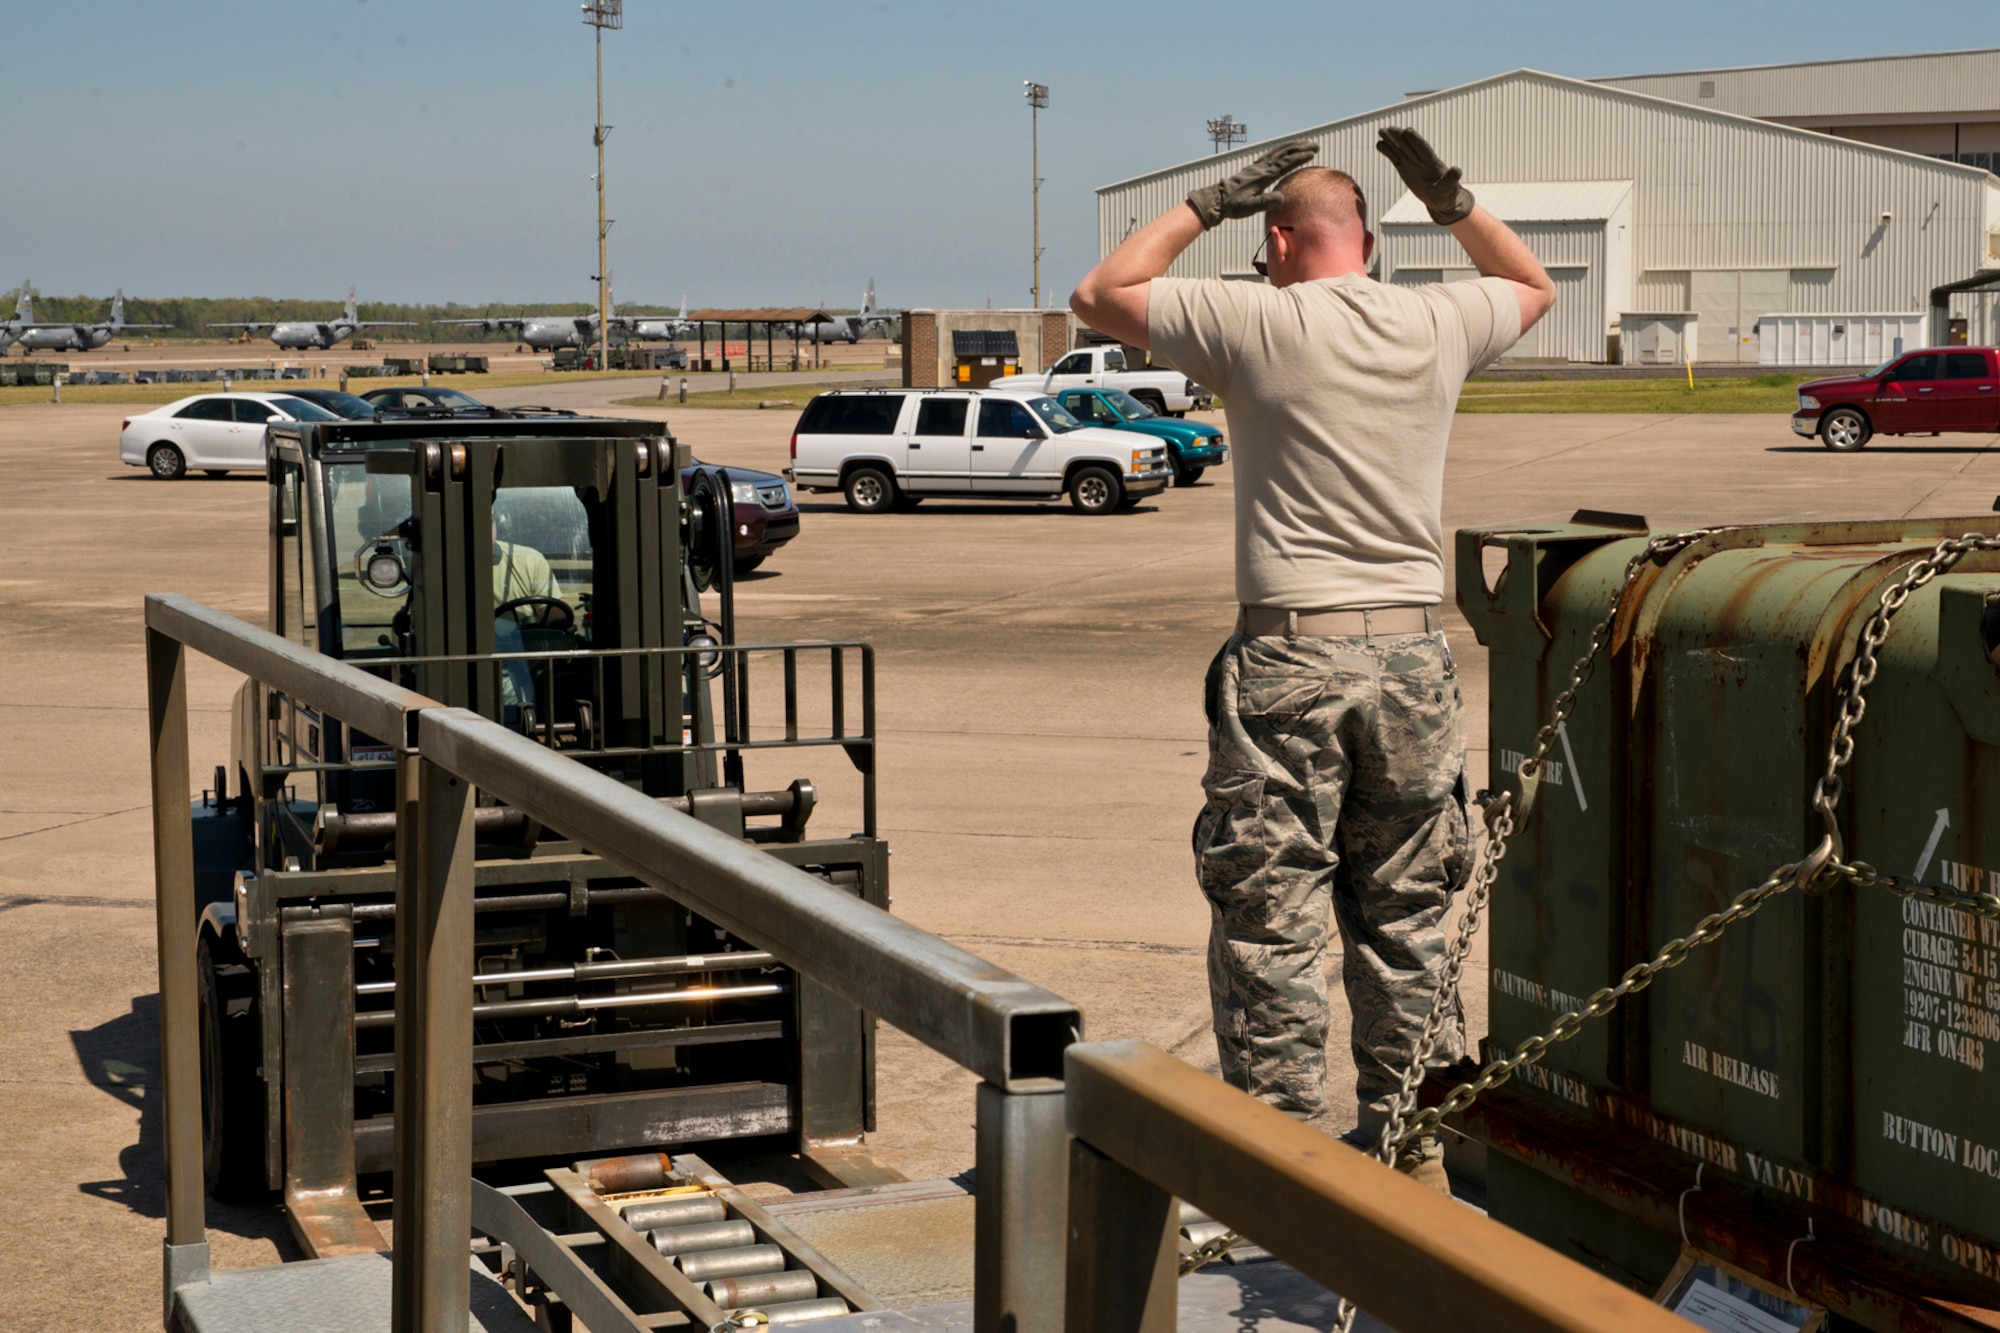 U.S. Air Force Reserve Tech Sgt. Jason Gibson, air transportation journeyman, 96th Aerial Port Squadron, directs a forklift driver during a practice session April 1, 2017, at Little Rock Air Force Base, Ark. Gibson is part of a team that will be competing in this year’s Port Dawg Challenge at Dobbins Air Reserve Base, Ga. (U.S. Air Force photo by Master Sgt. Jeff Walston/Released)